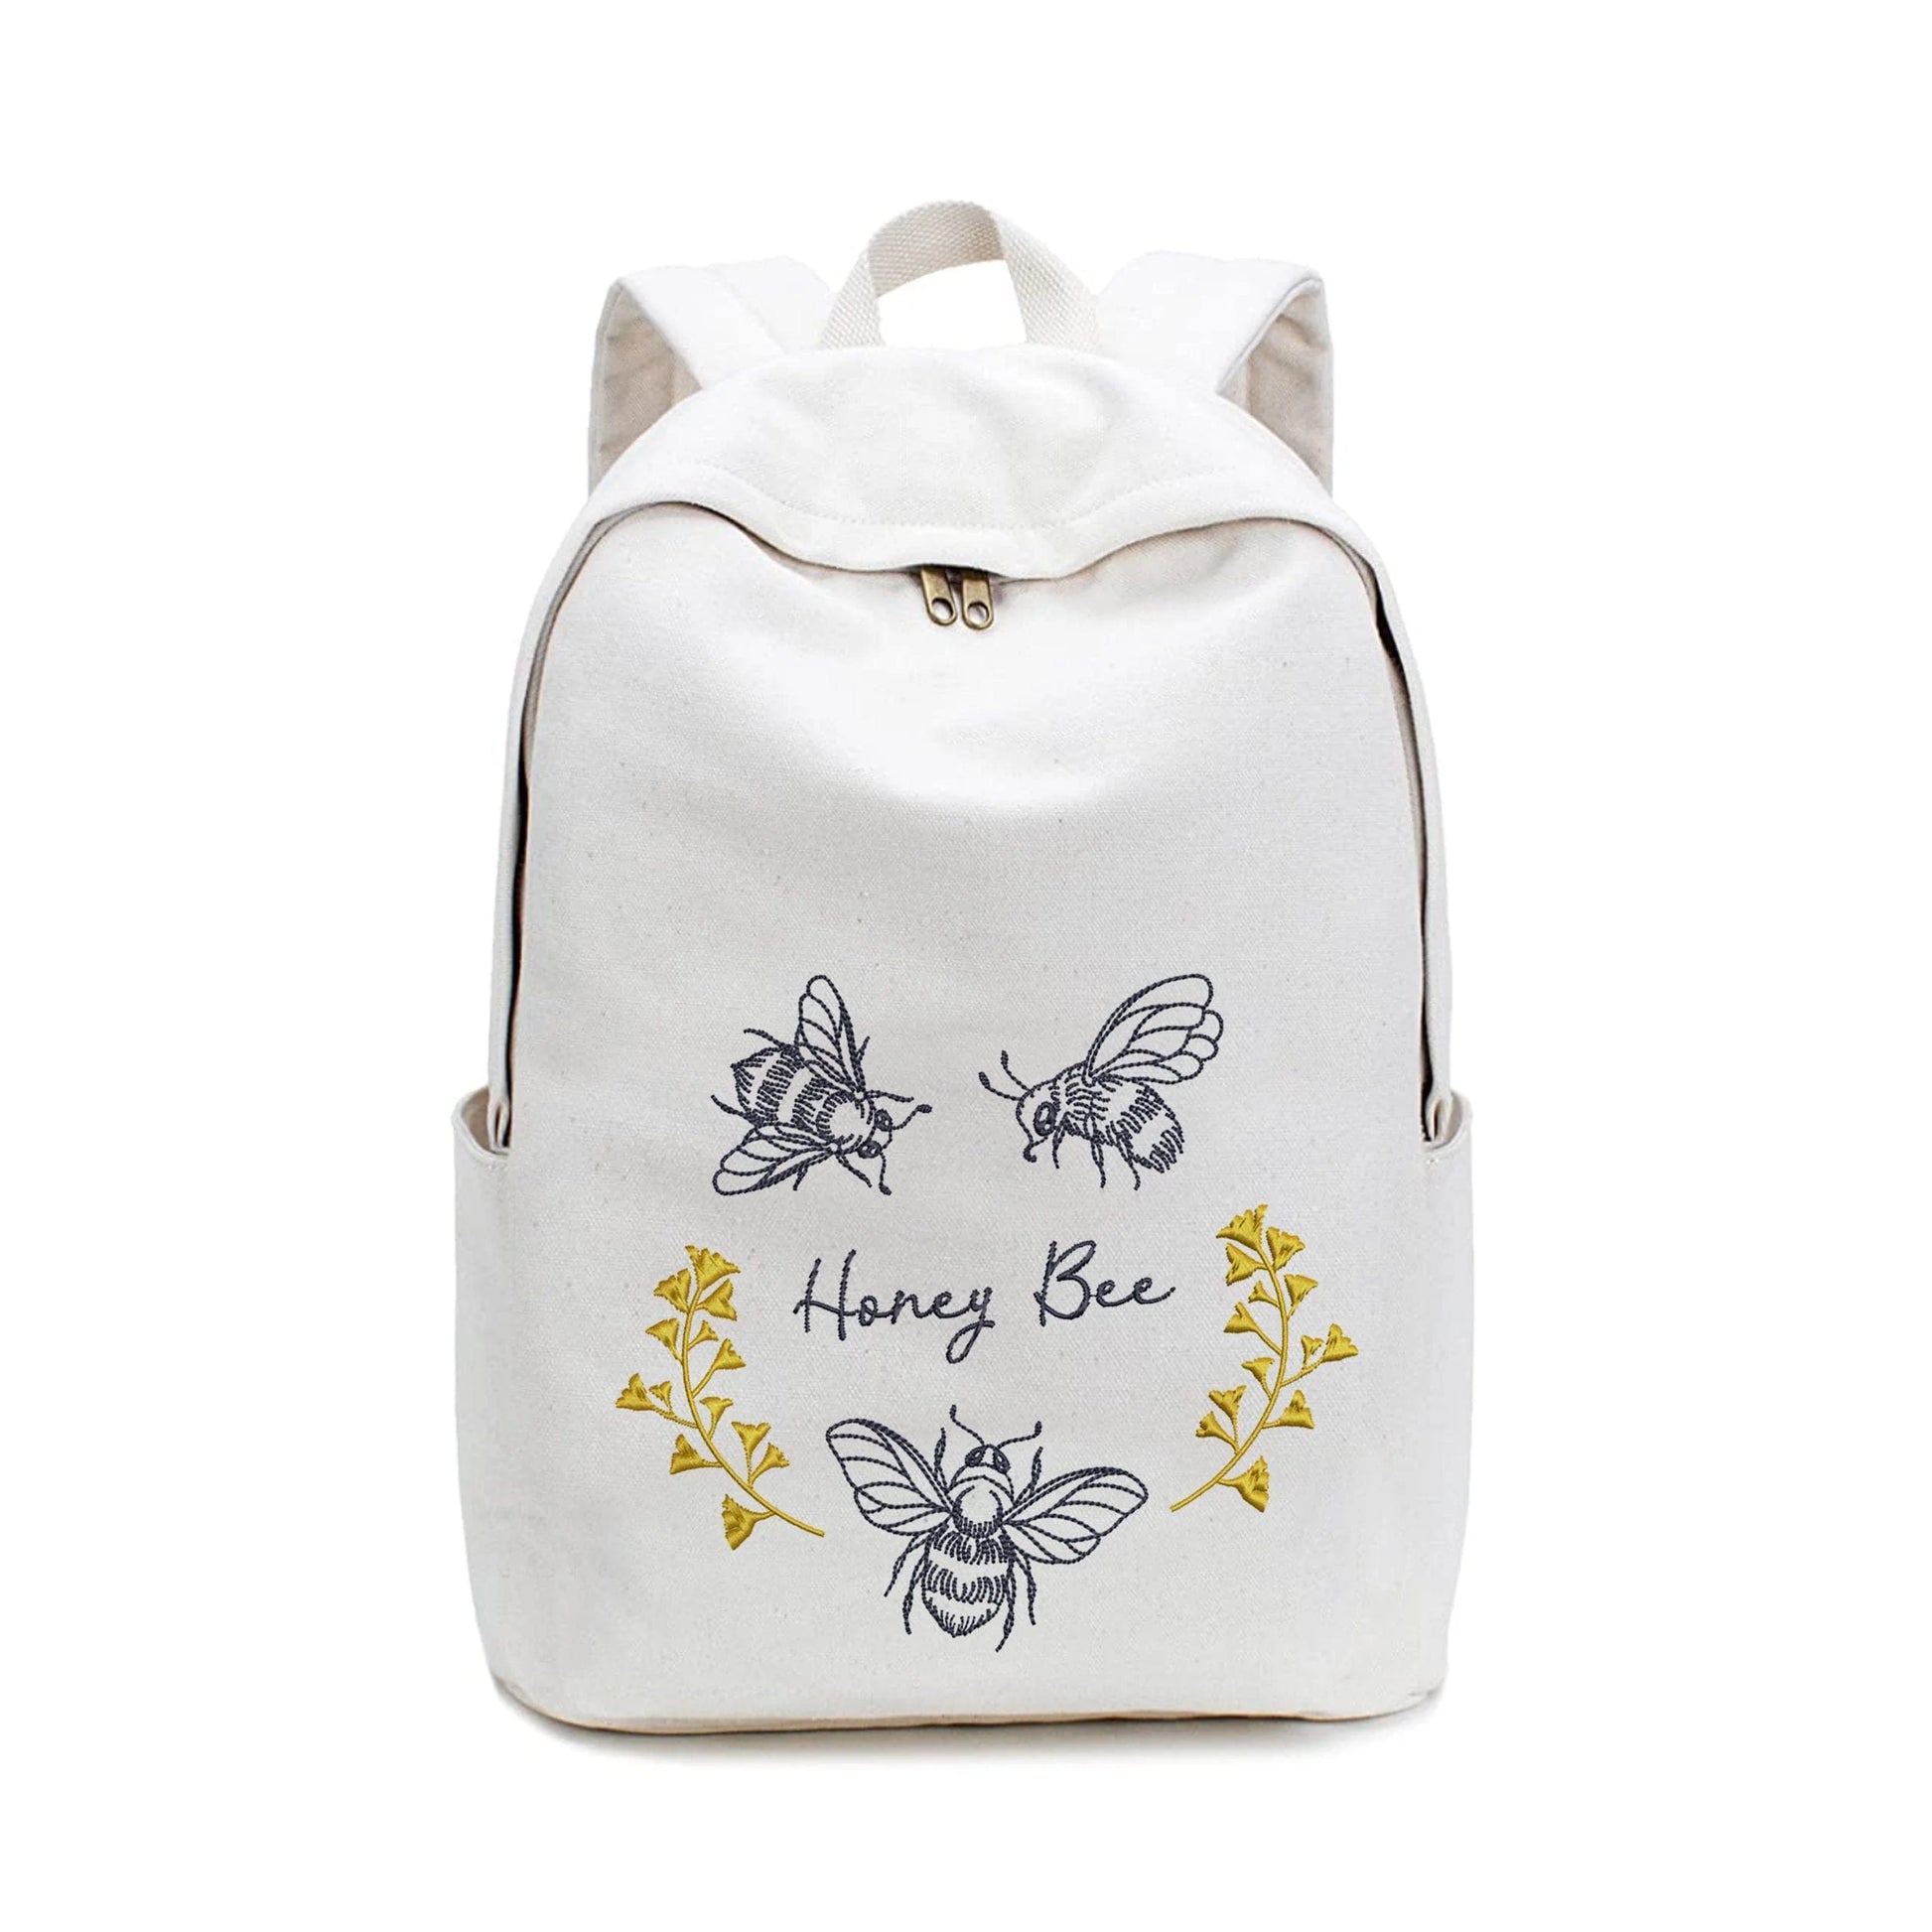 Honey Bee Machine Embroidery Design on a packpack